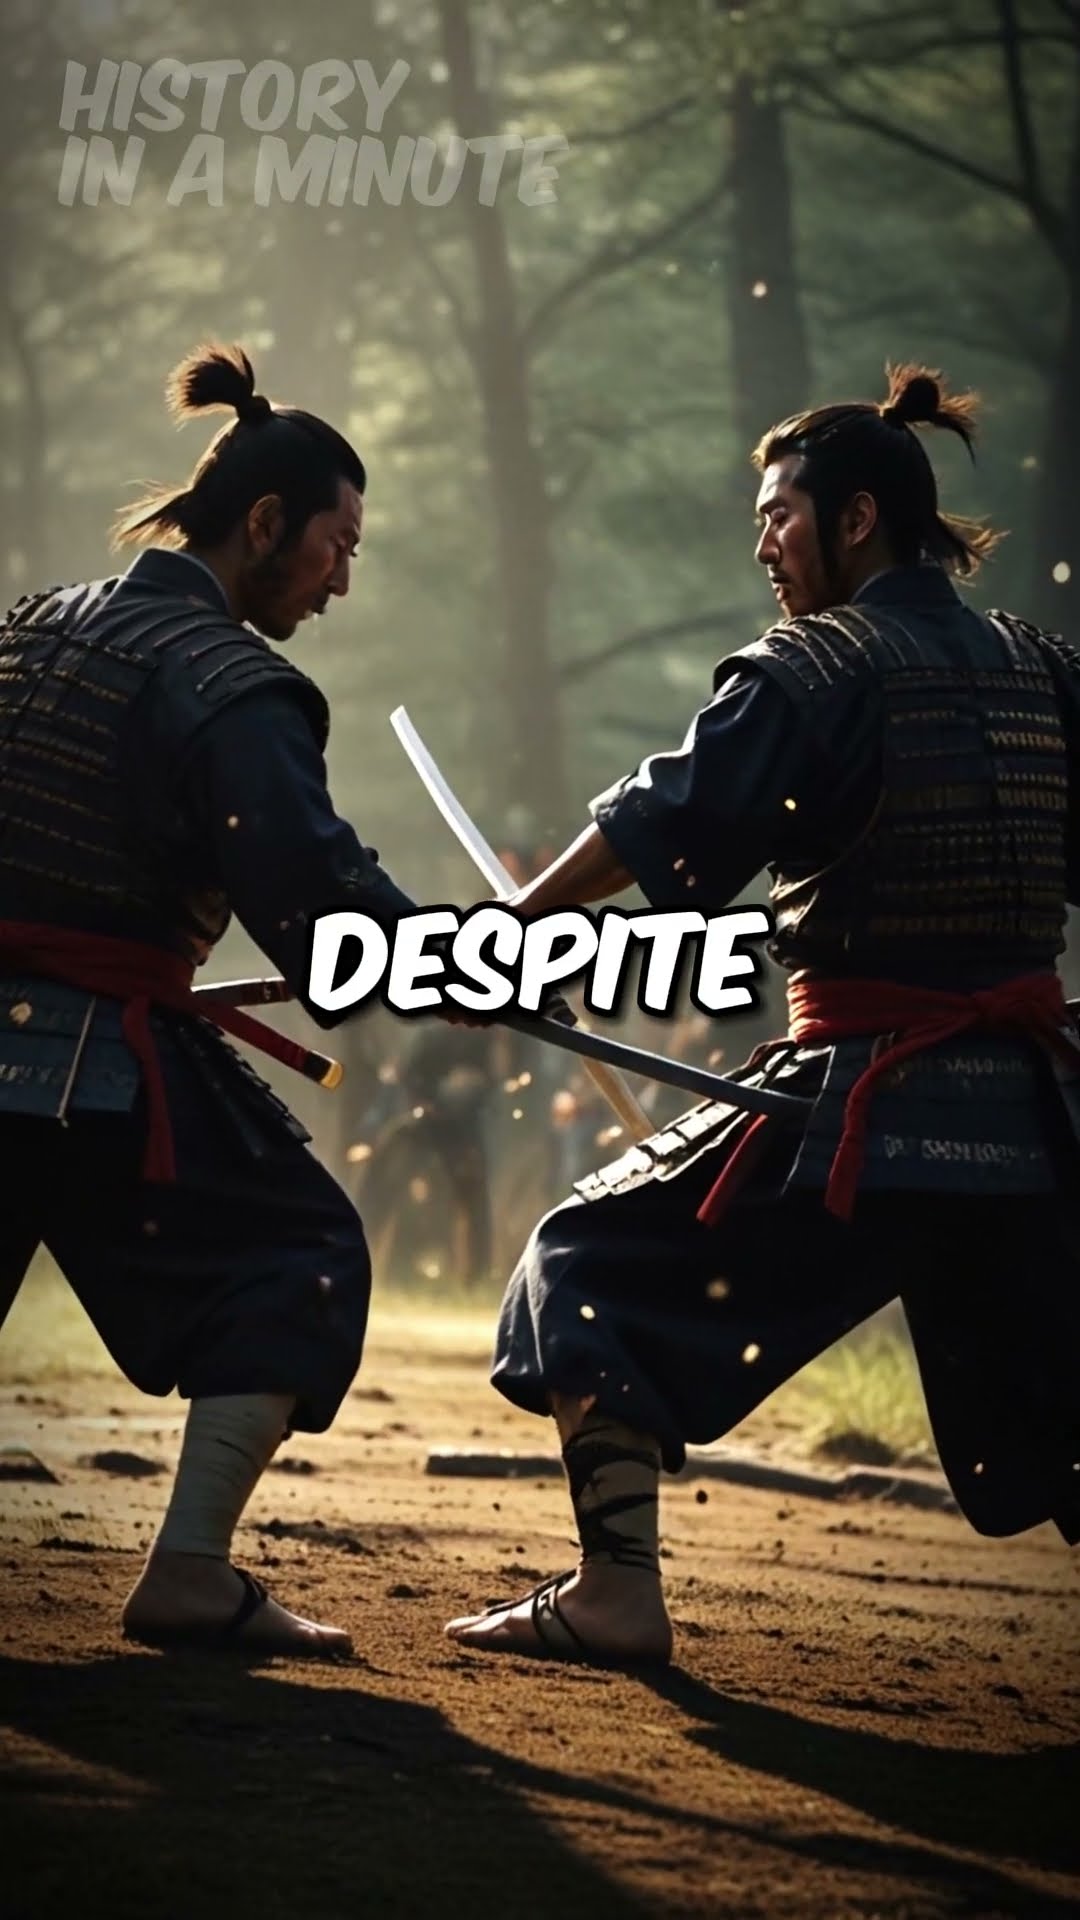 3 Facts About Samurai Warriors #shorts #history #historyfacts